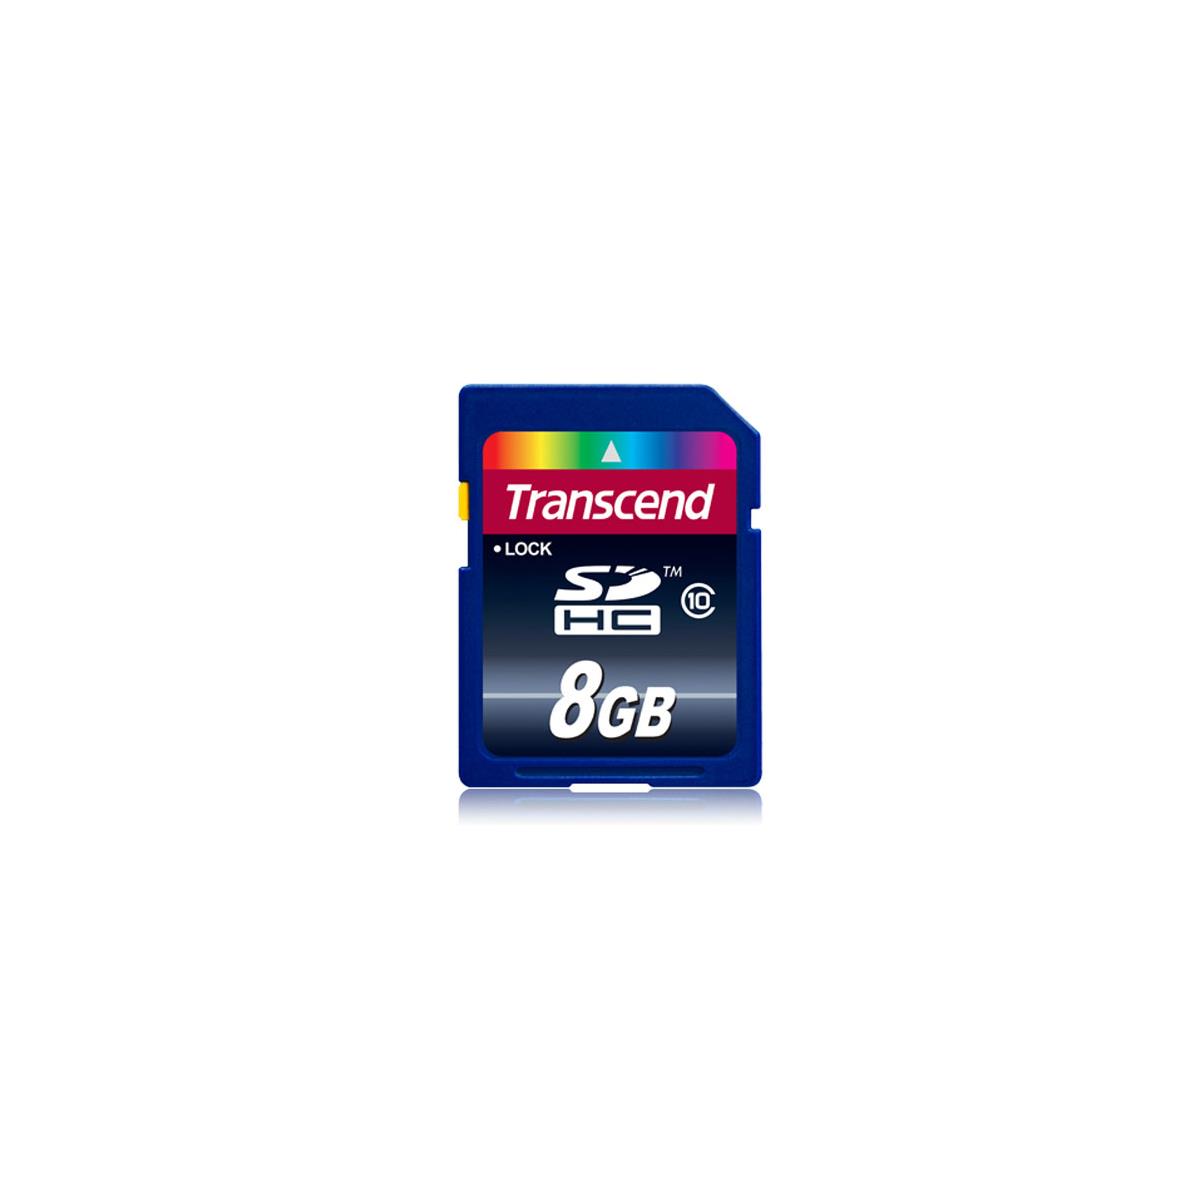 Image of Transcend 8GB Class 10 SDHC Memory Card